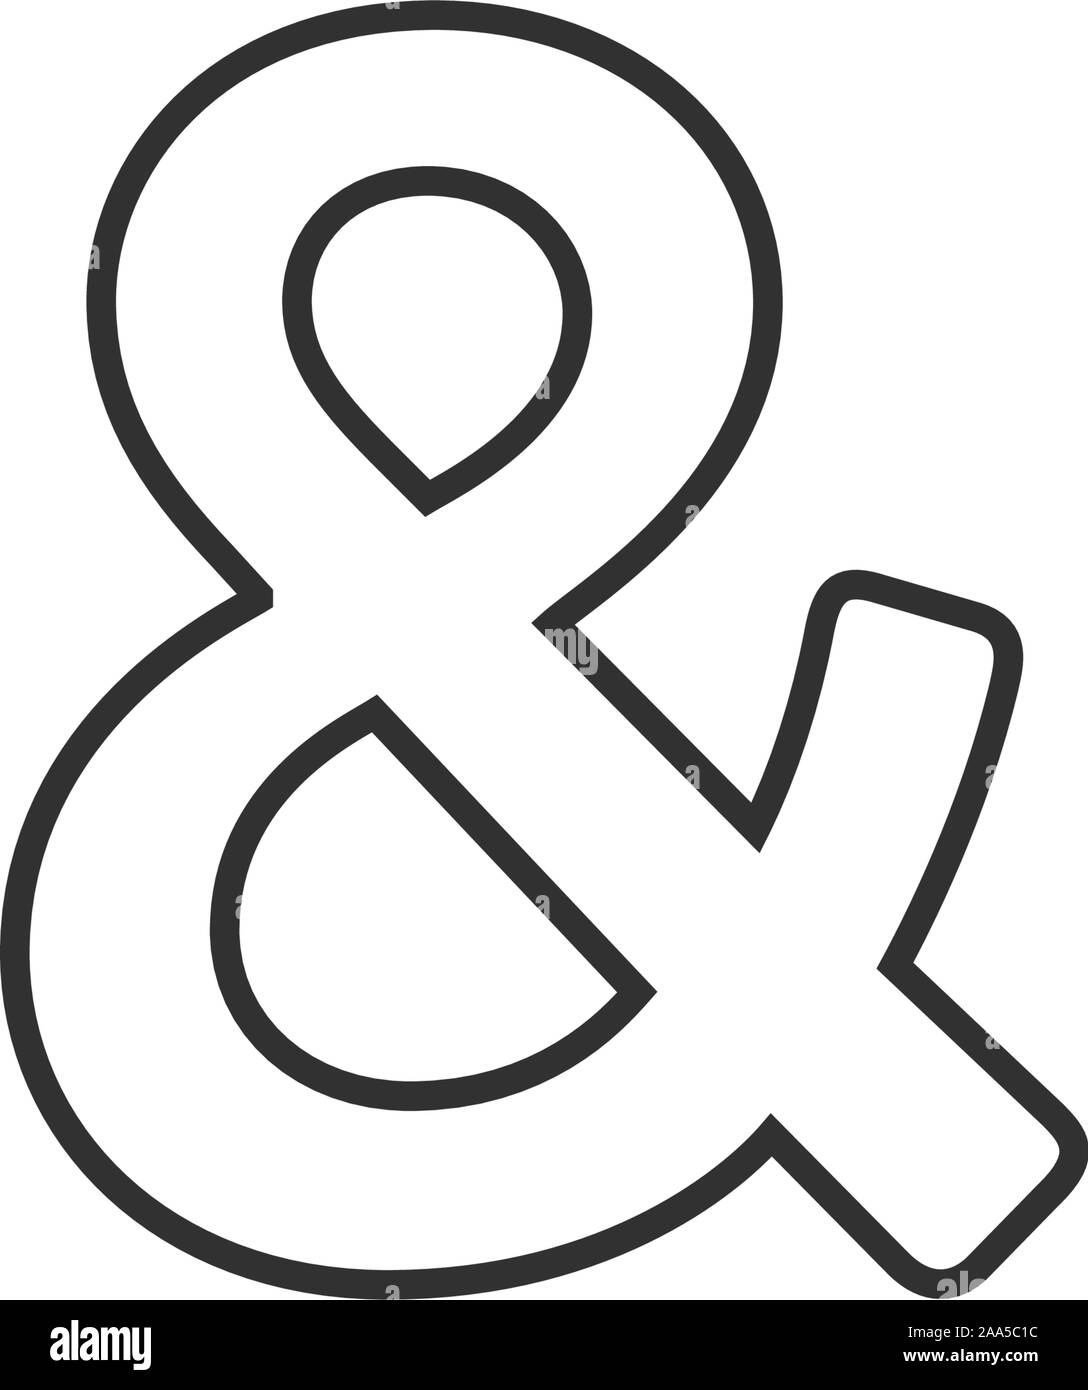 https://c8.alamy.com/comp/2AA5C1C/linear-ampersand-symbol-logogram-representing-the-conjunction-and-stock-vector-illustration-isolated-on-white-background-2AA5C1C.jpg